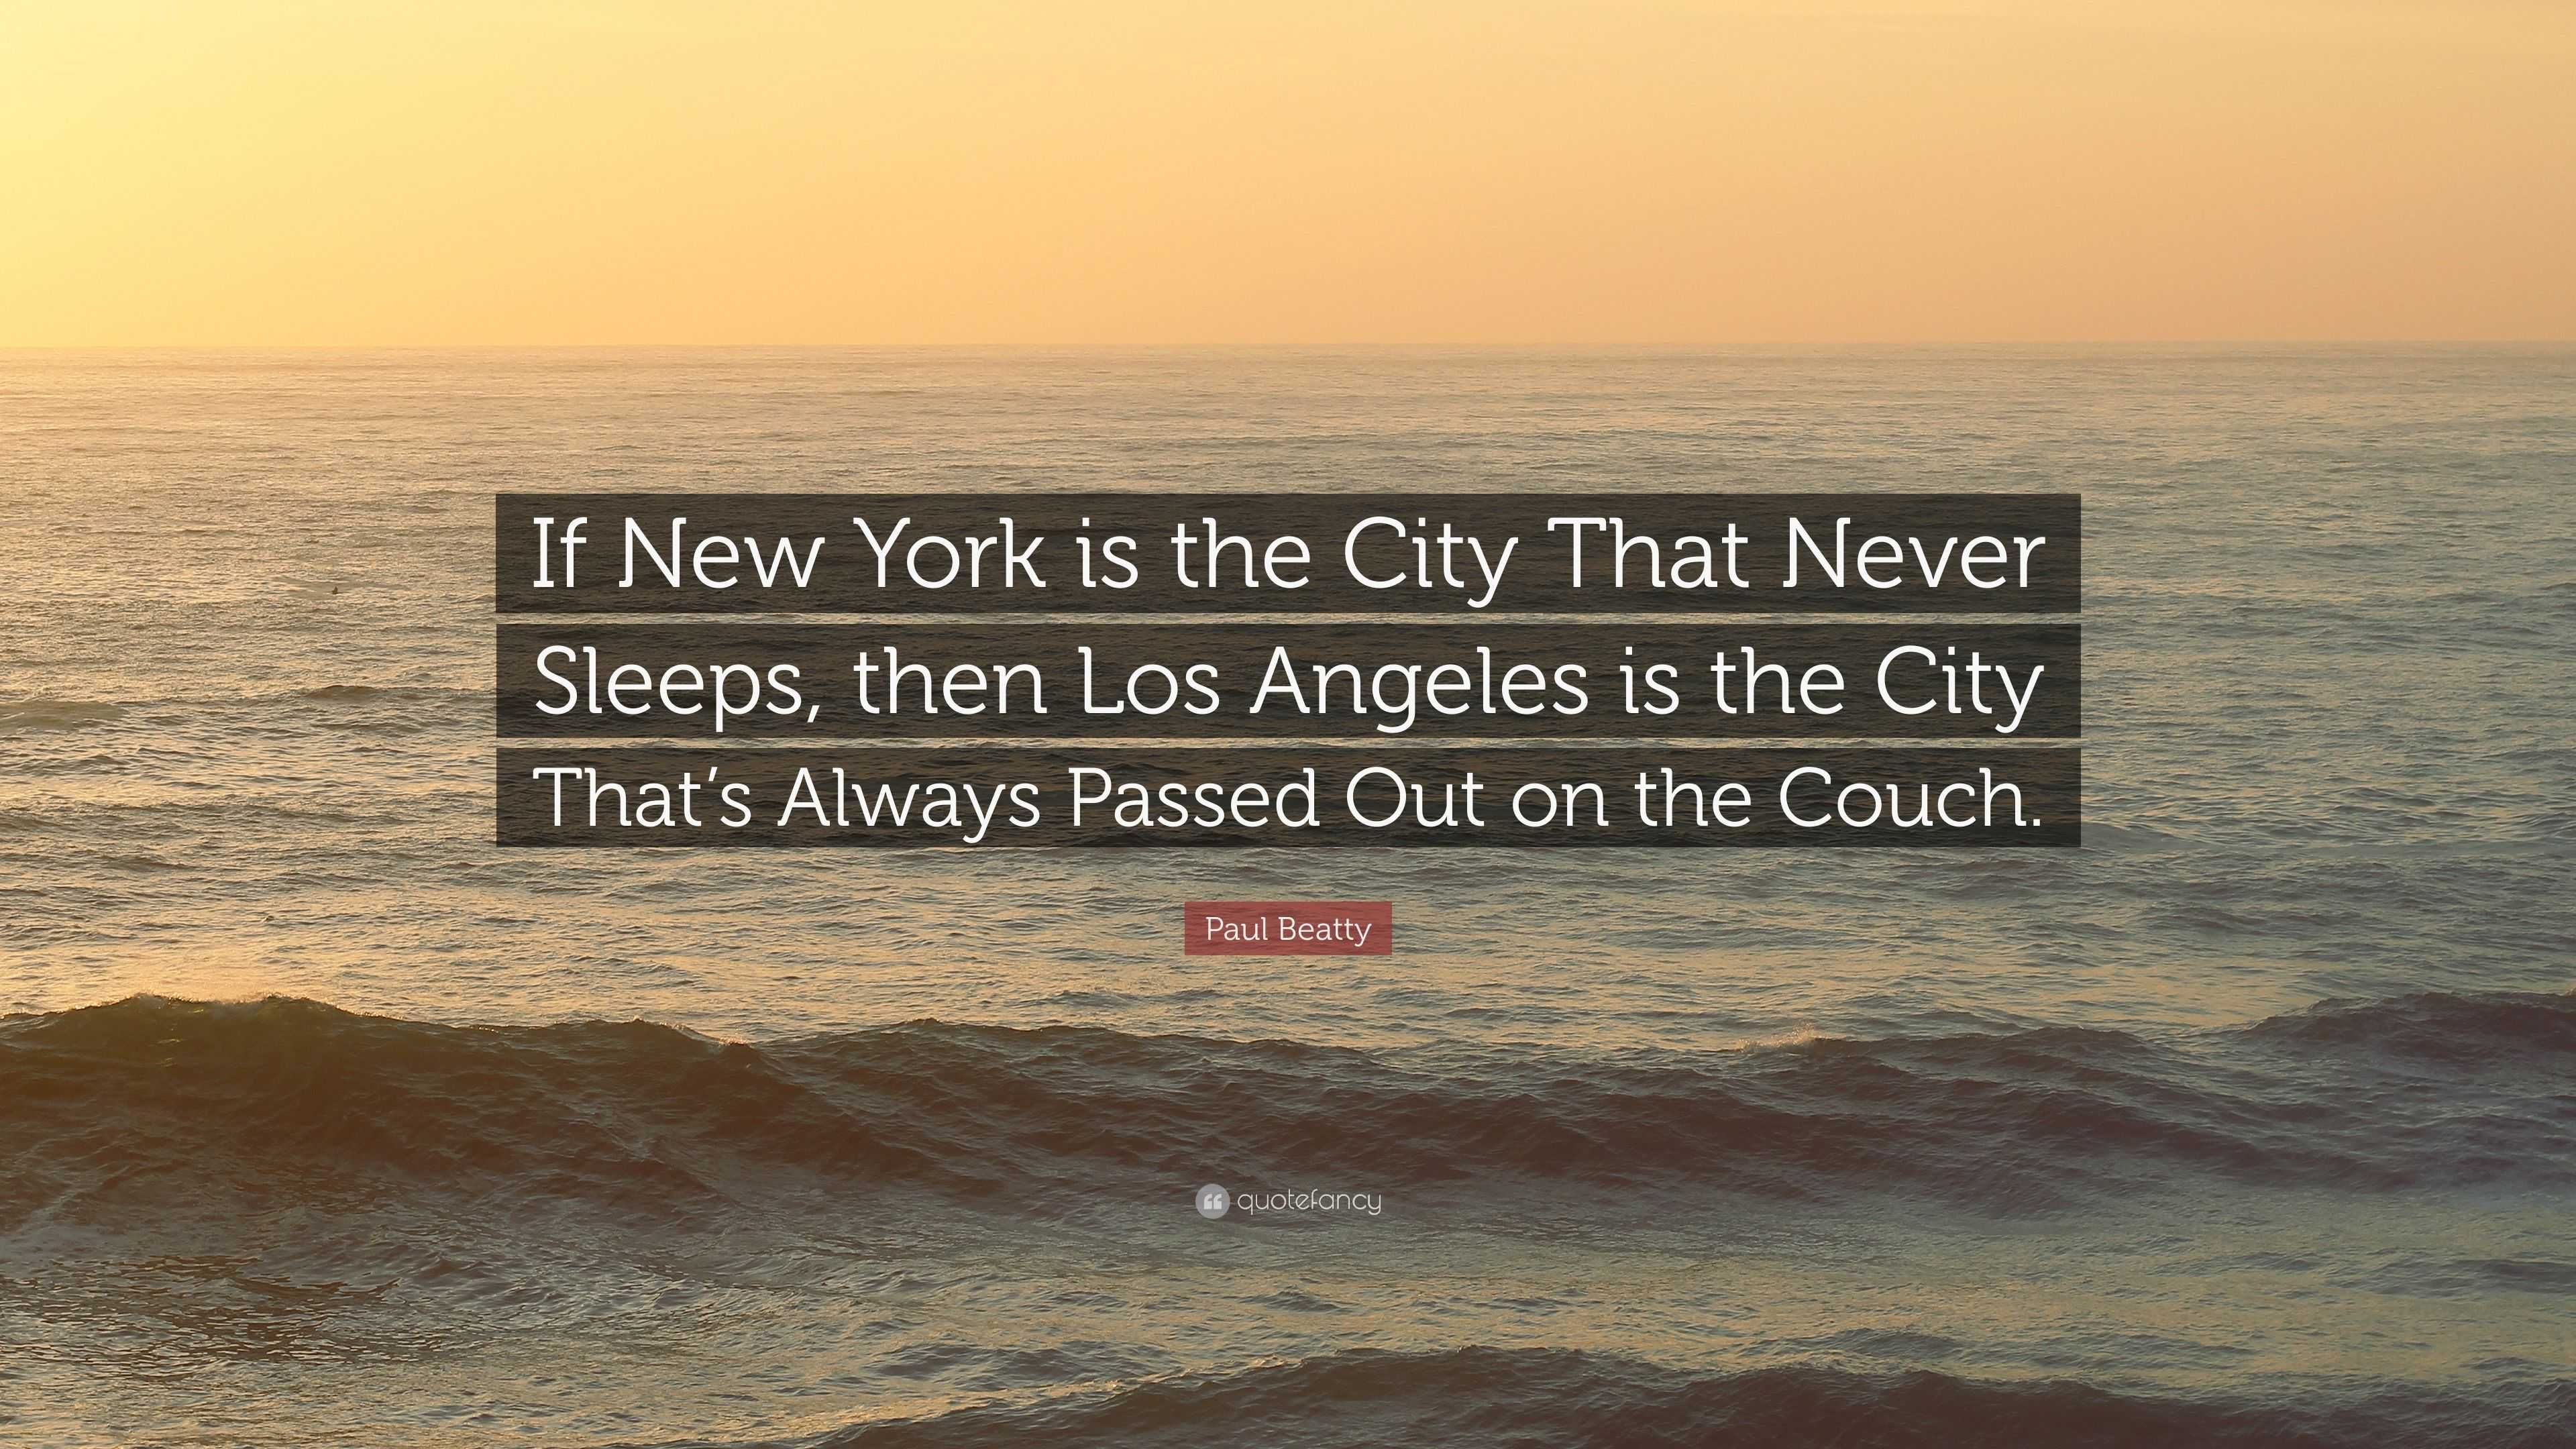 Paul Beatty Quote: “If New York is the City That Never Sleeps, then Los  Angeles is